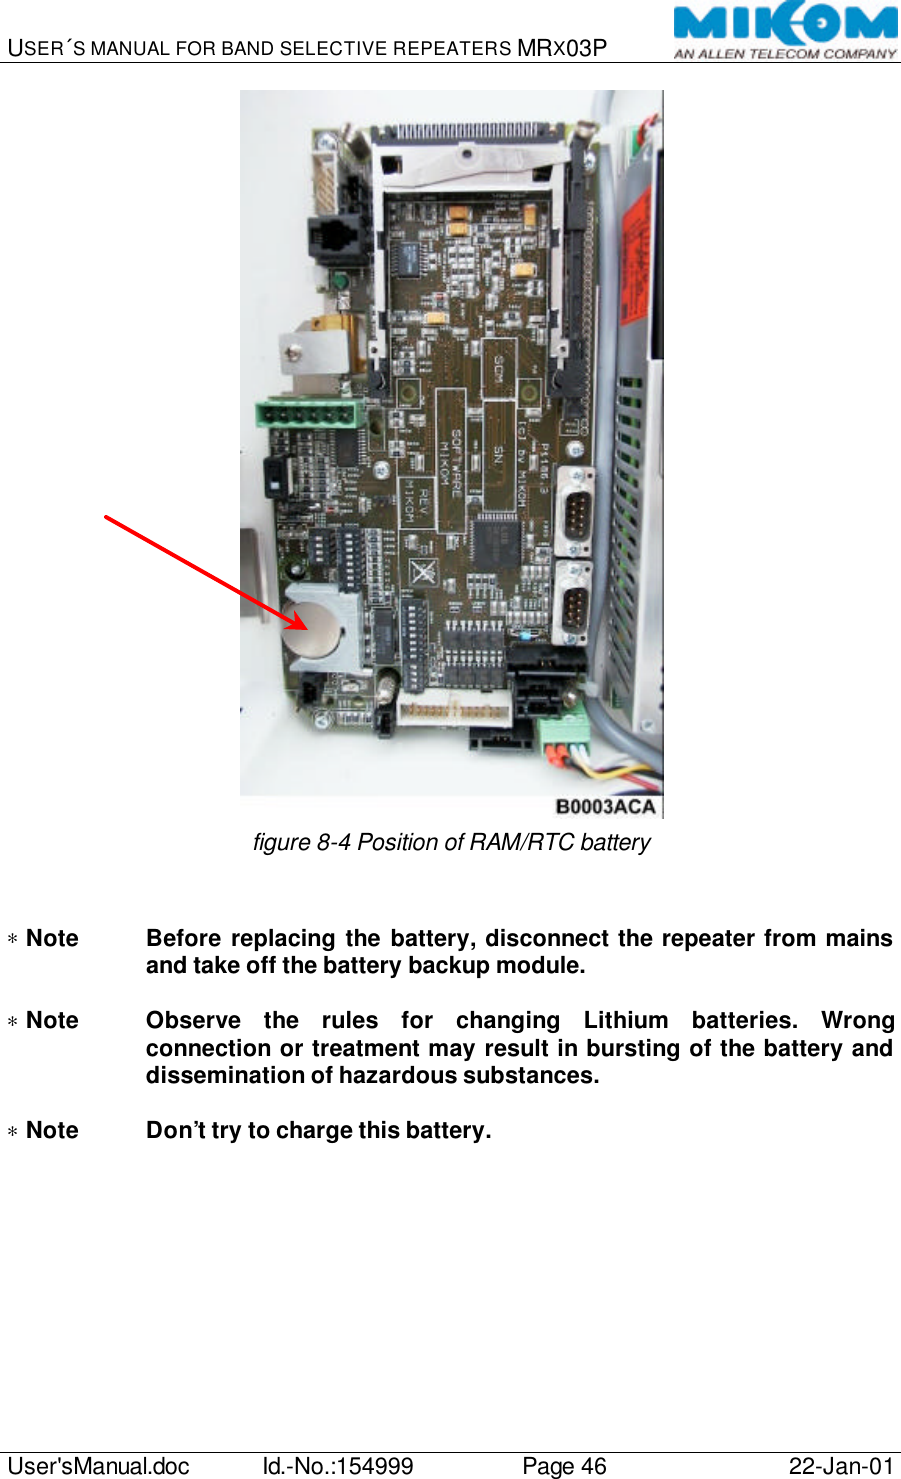 USER´S MANUAL FOR BAND SELECTIVE REPEATERS MRX03P   User&apos;sManual.doc Id.-No.:154999 Page 46 22-Jan-01   figure 8-4 Position of RAM/RTC battery   ∗ Note Before replacing the battery, disconnect the repeater from mains and take off the battery backup module.  ∗ Note Observe the rules for changing Lithium batteries. Wrong connection or treatment may result in bursting of the battery and dissemination of hazardous substances.  ∗ Note Don’t try to charge this battery.  